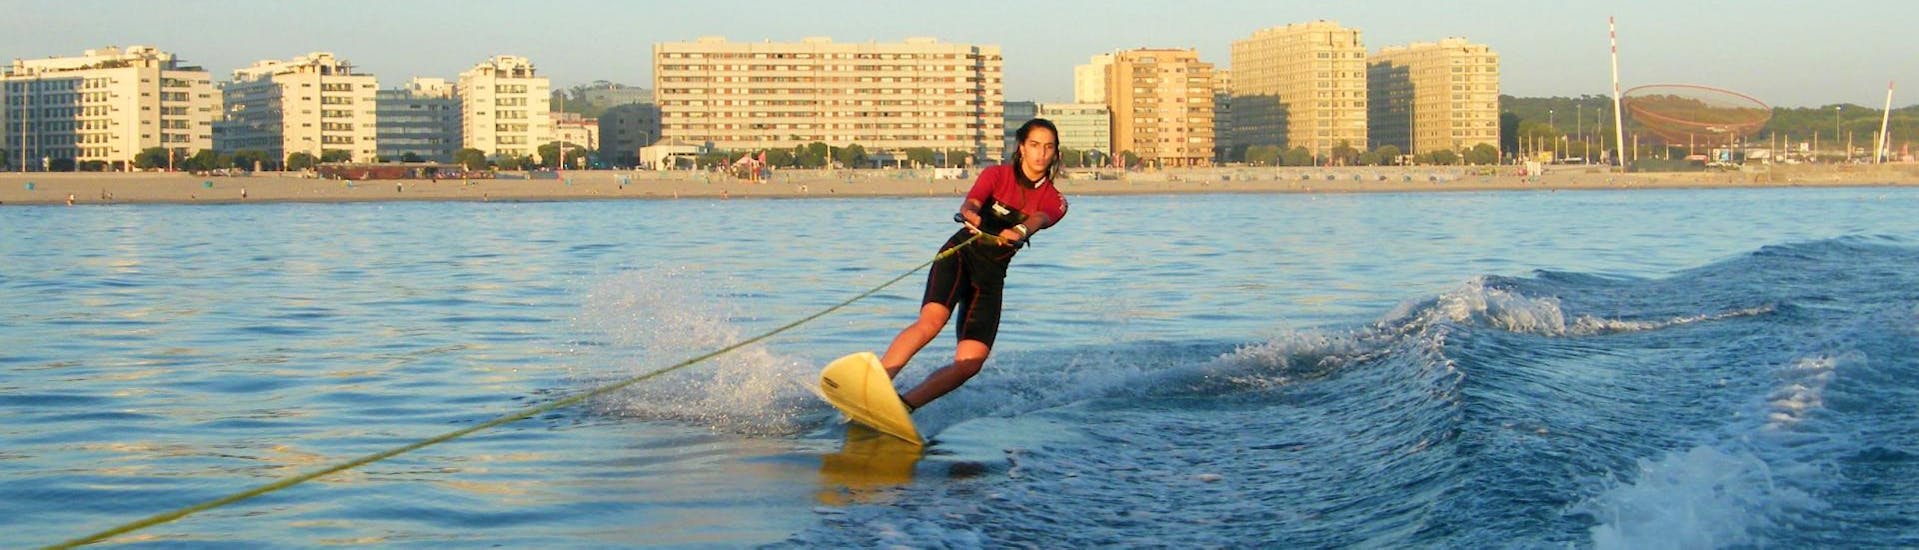 During the private wakeboard & wakesurf lessons, a woman is enjoying wakesurfing under the supervision of a qualified instructor from Surfaventura.